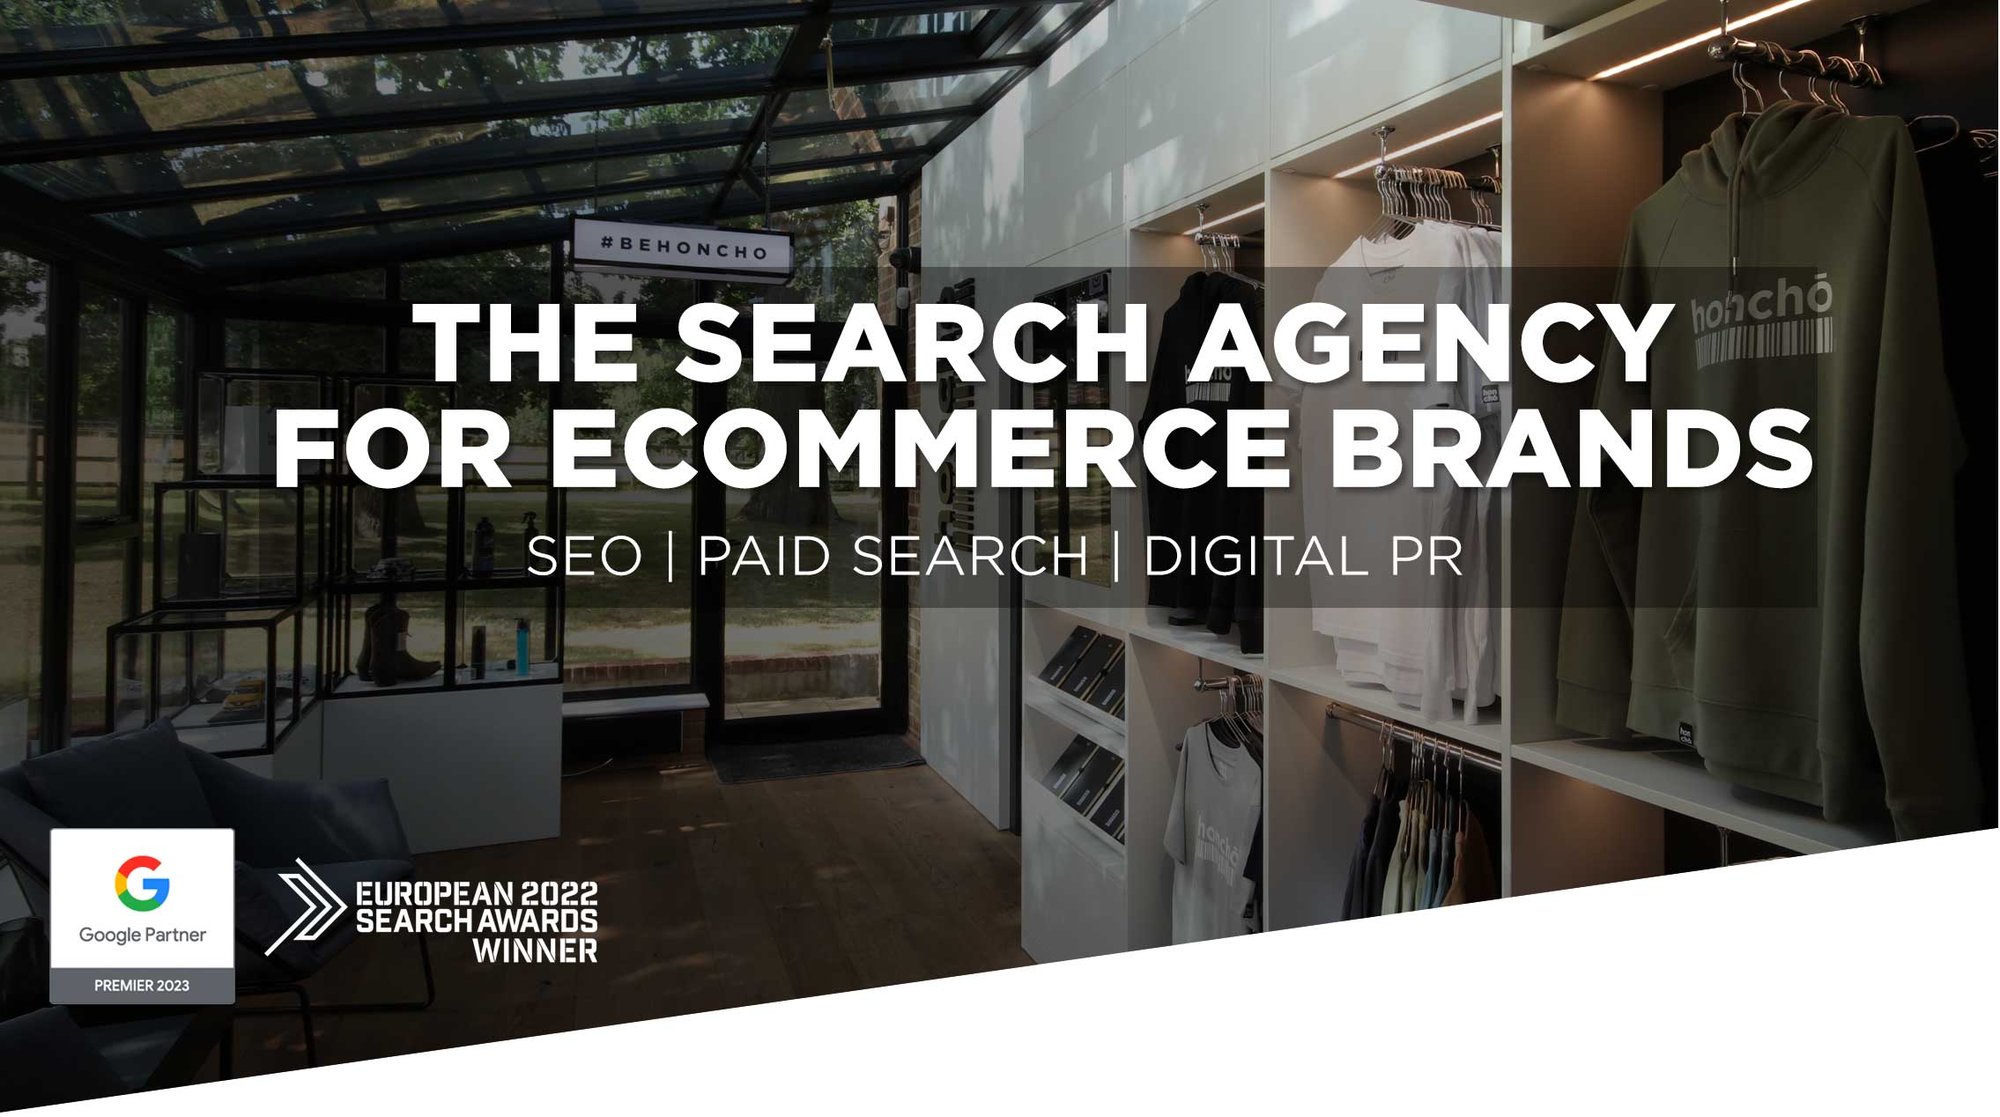 SEO, PPC & Digital PR Marketing Agency Services for Ecommerce Brands